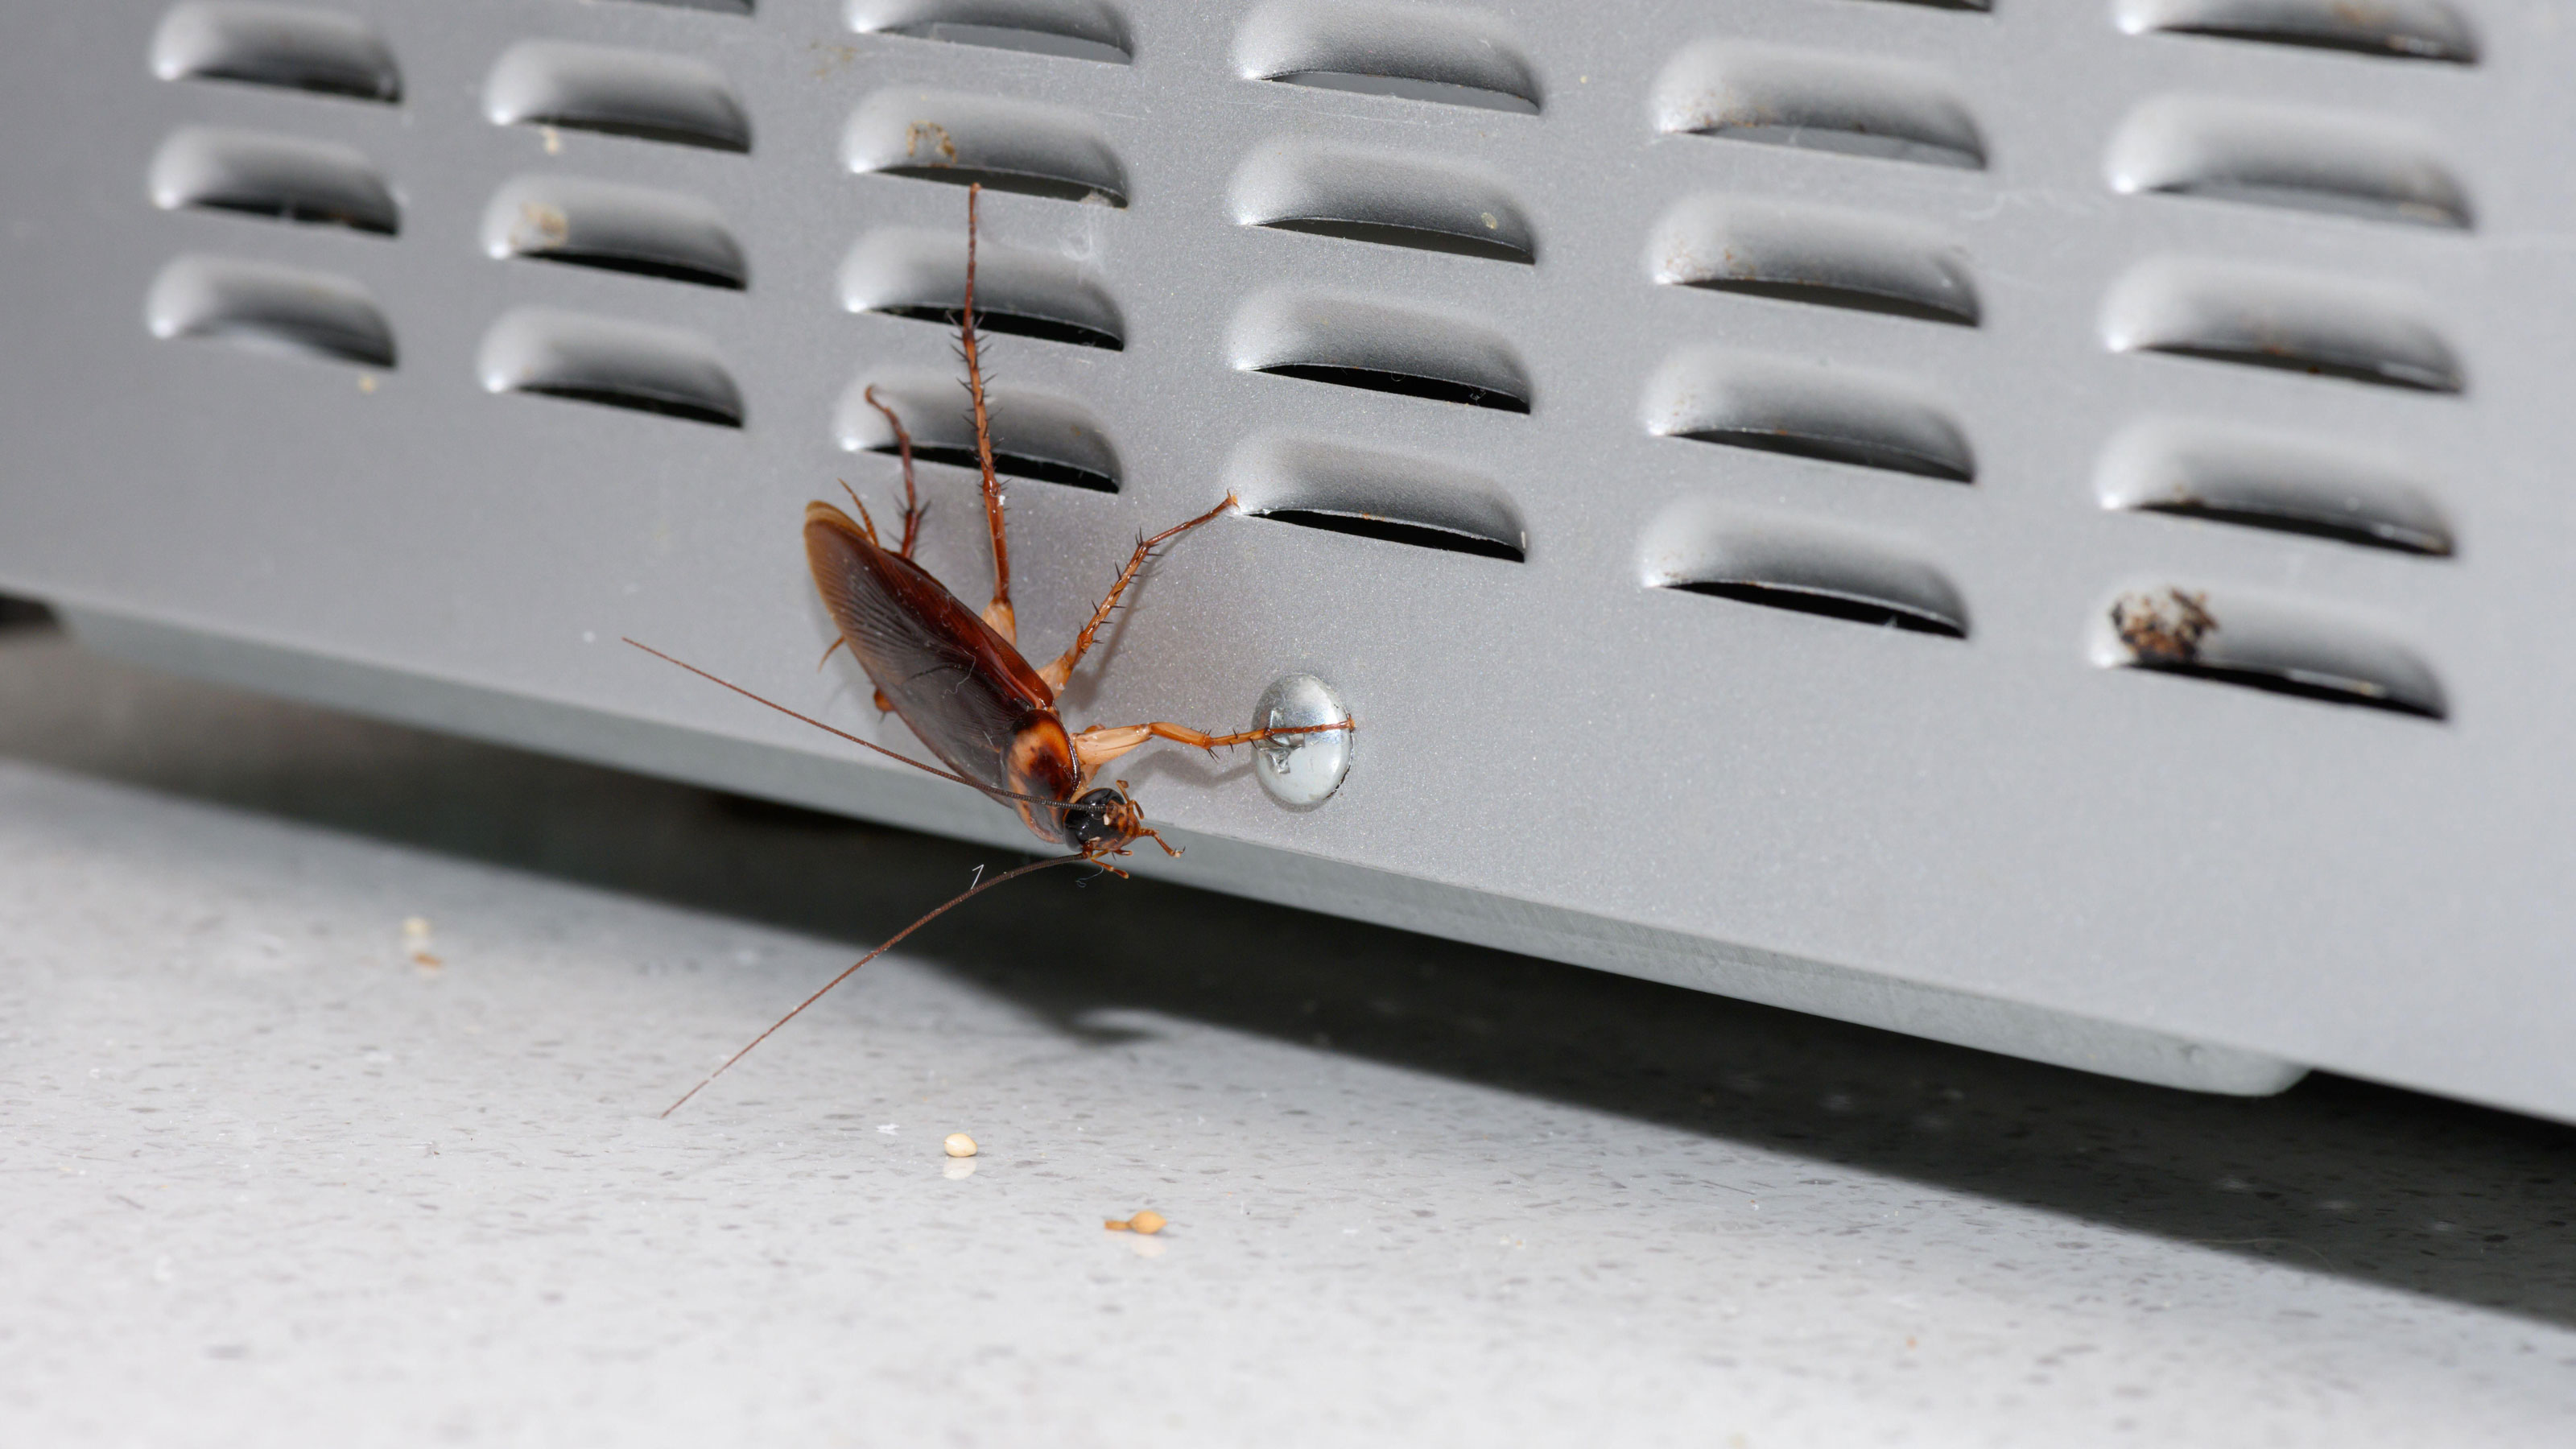 How to get rid of cockroaches from the kitchen, according to experts